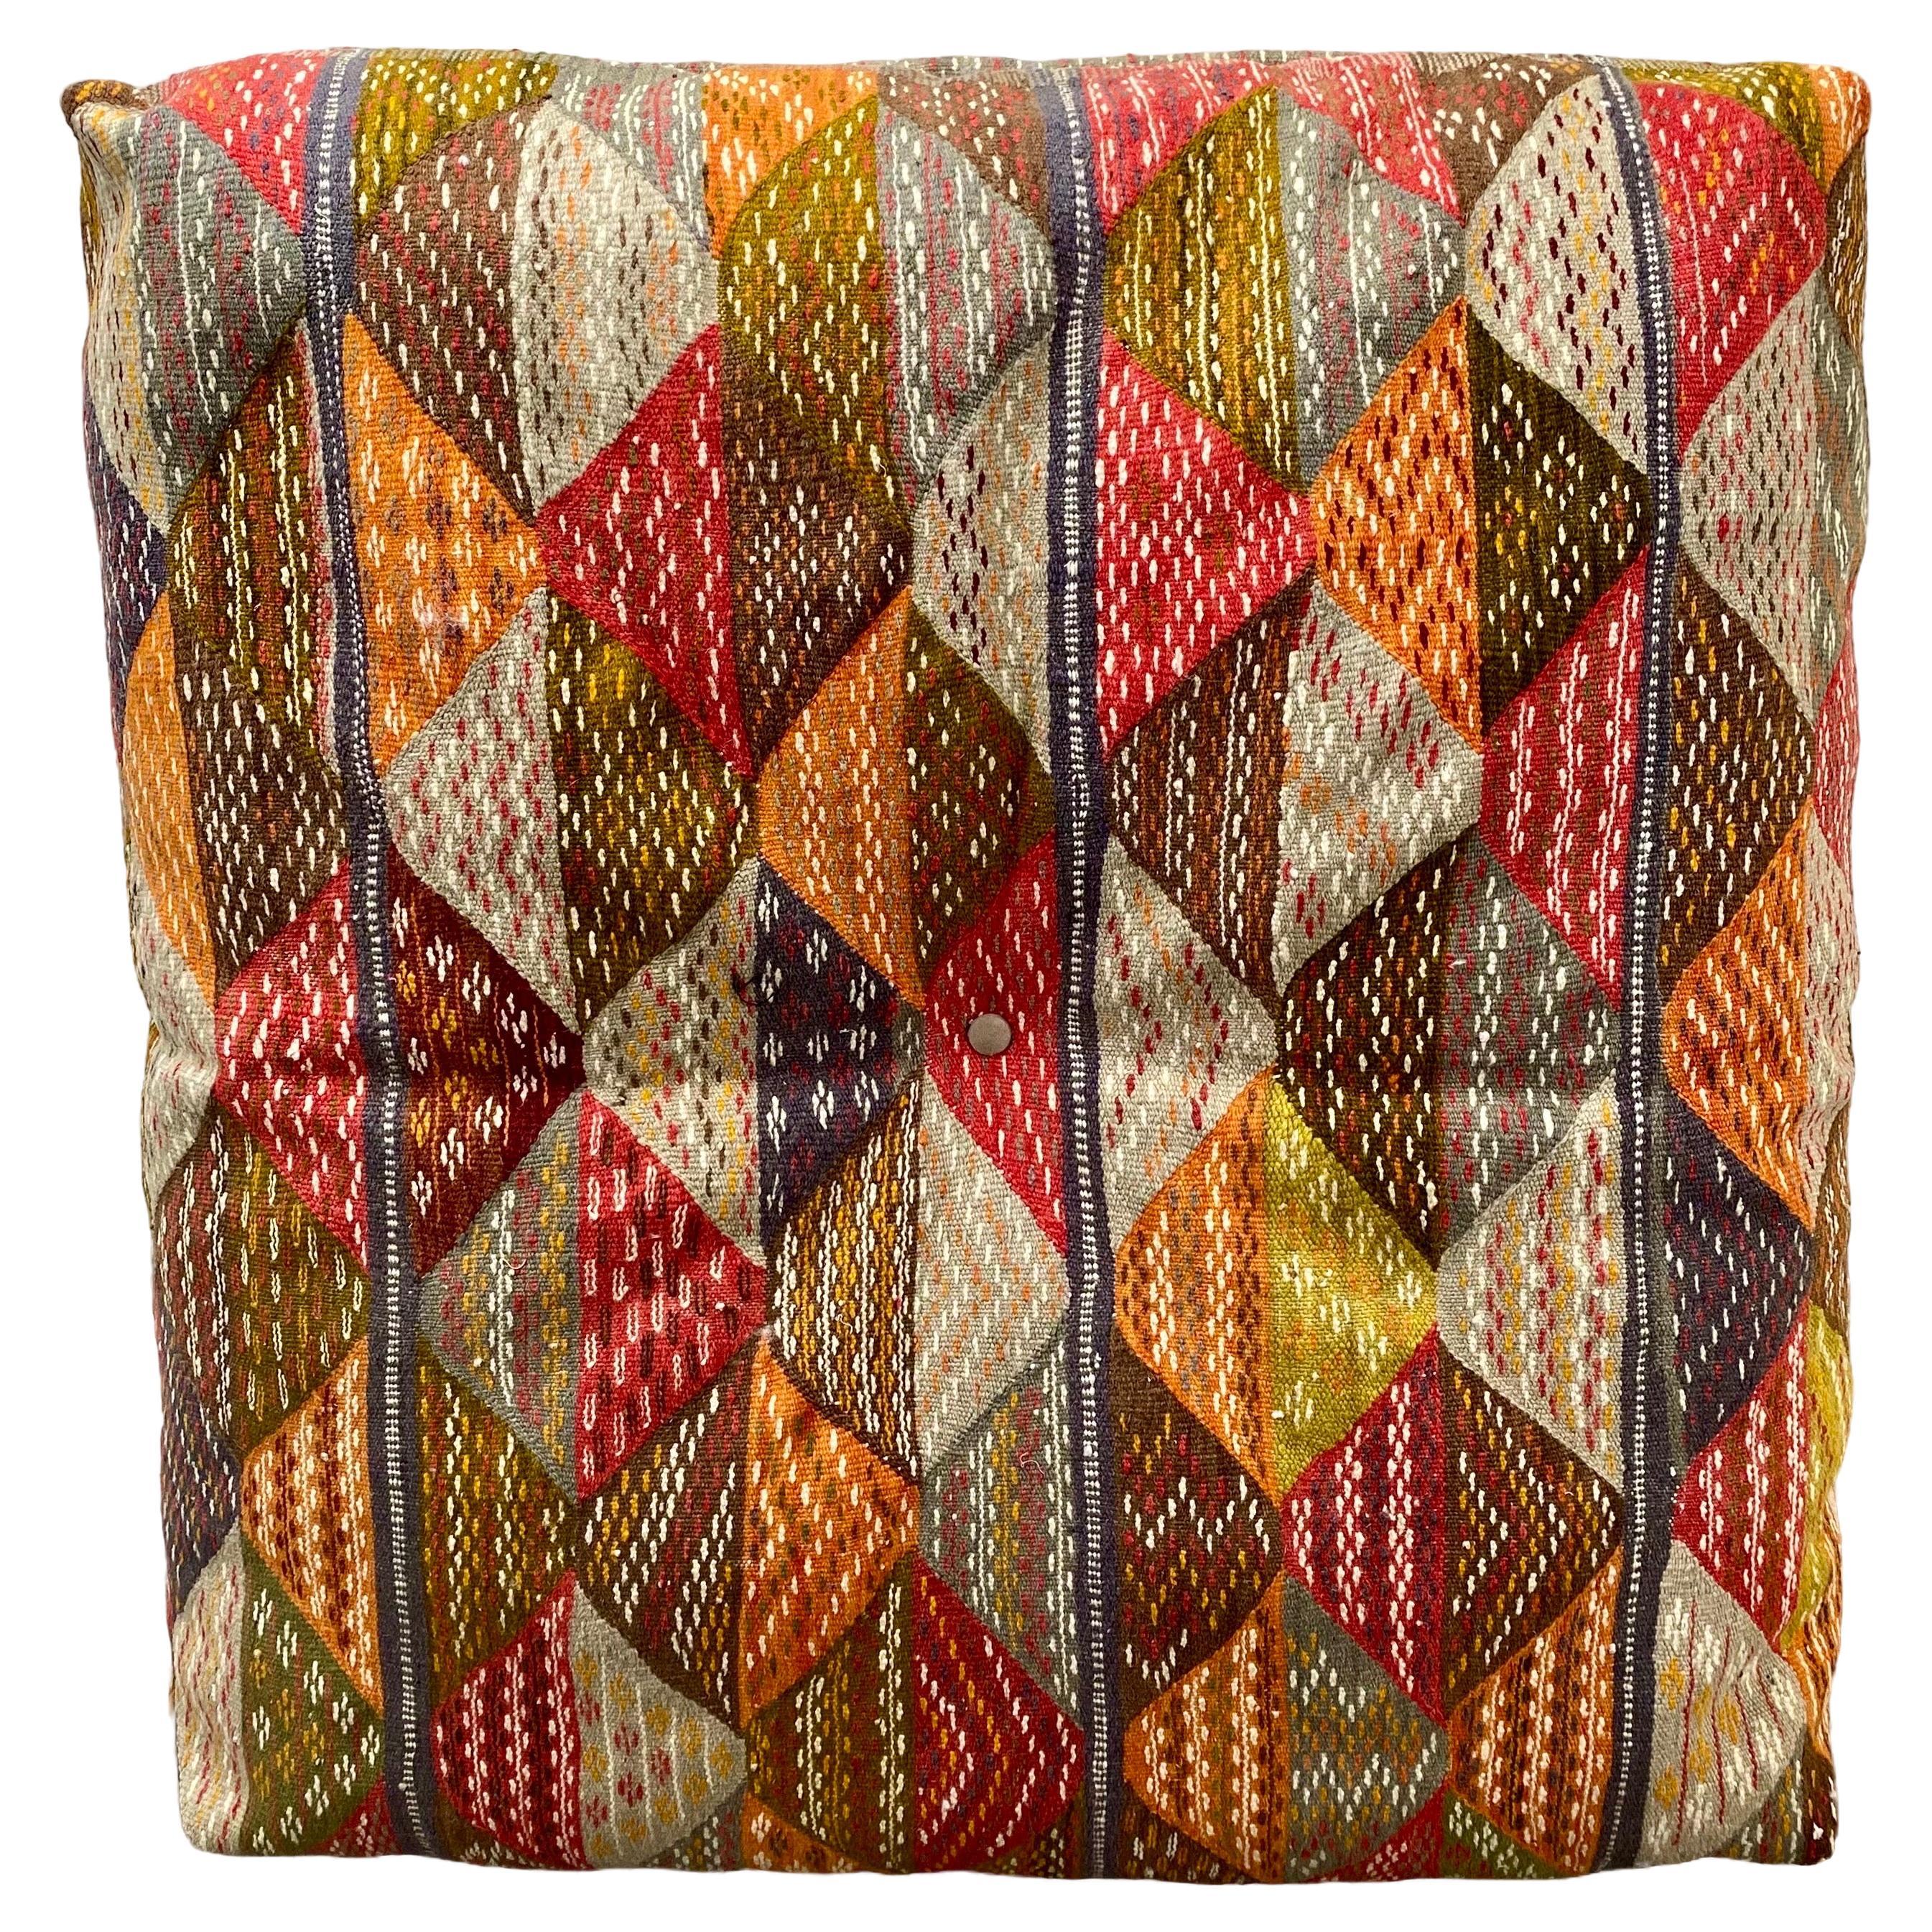 
A Boho Chic  oversized, large floor cushion, poof, or pillow crafted from a handwoven vintage Moroccan tribal flat-wave rug. This distinctive piece is meticulously fashioned from organic wool, imbued with natural dyes, resulting in an artisanal